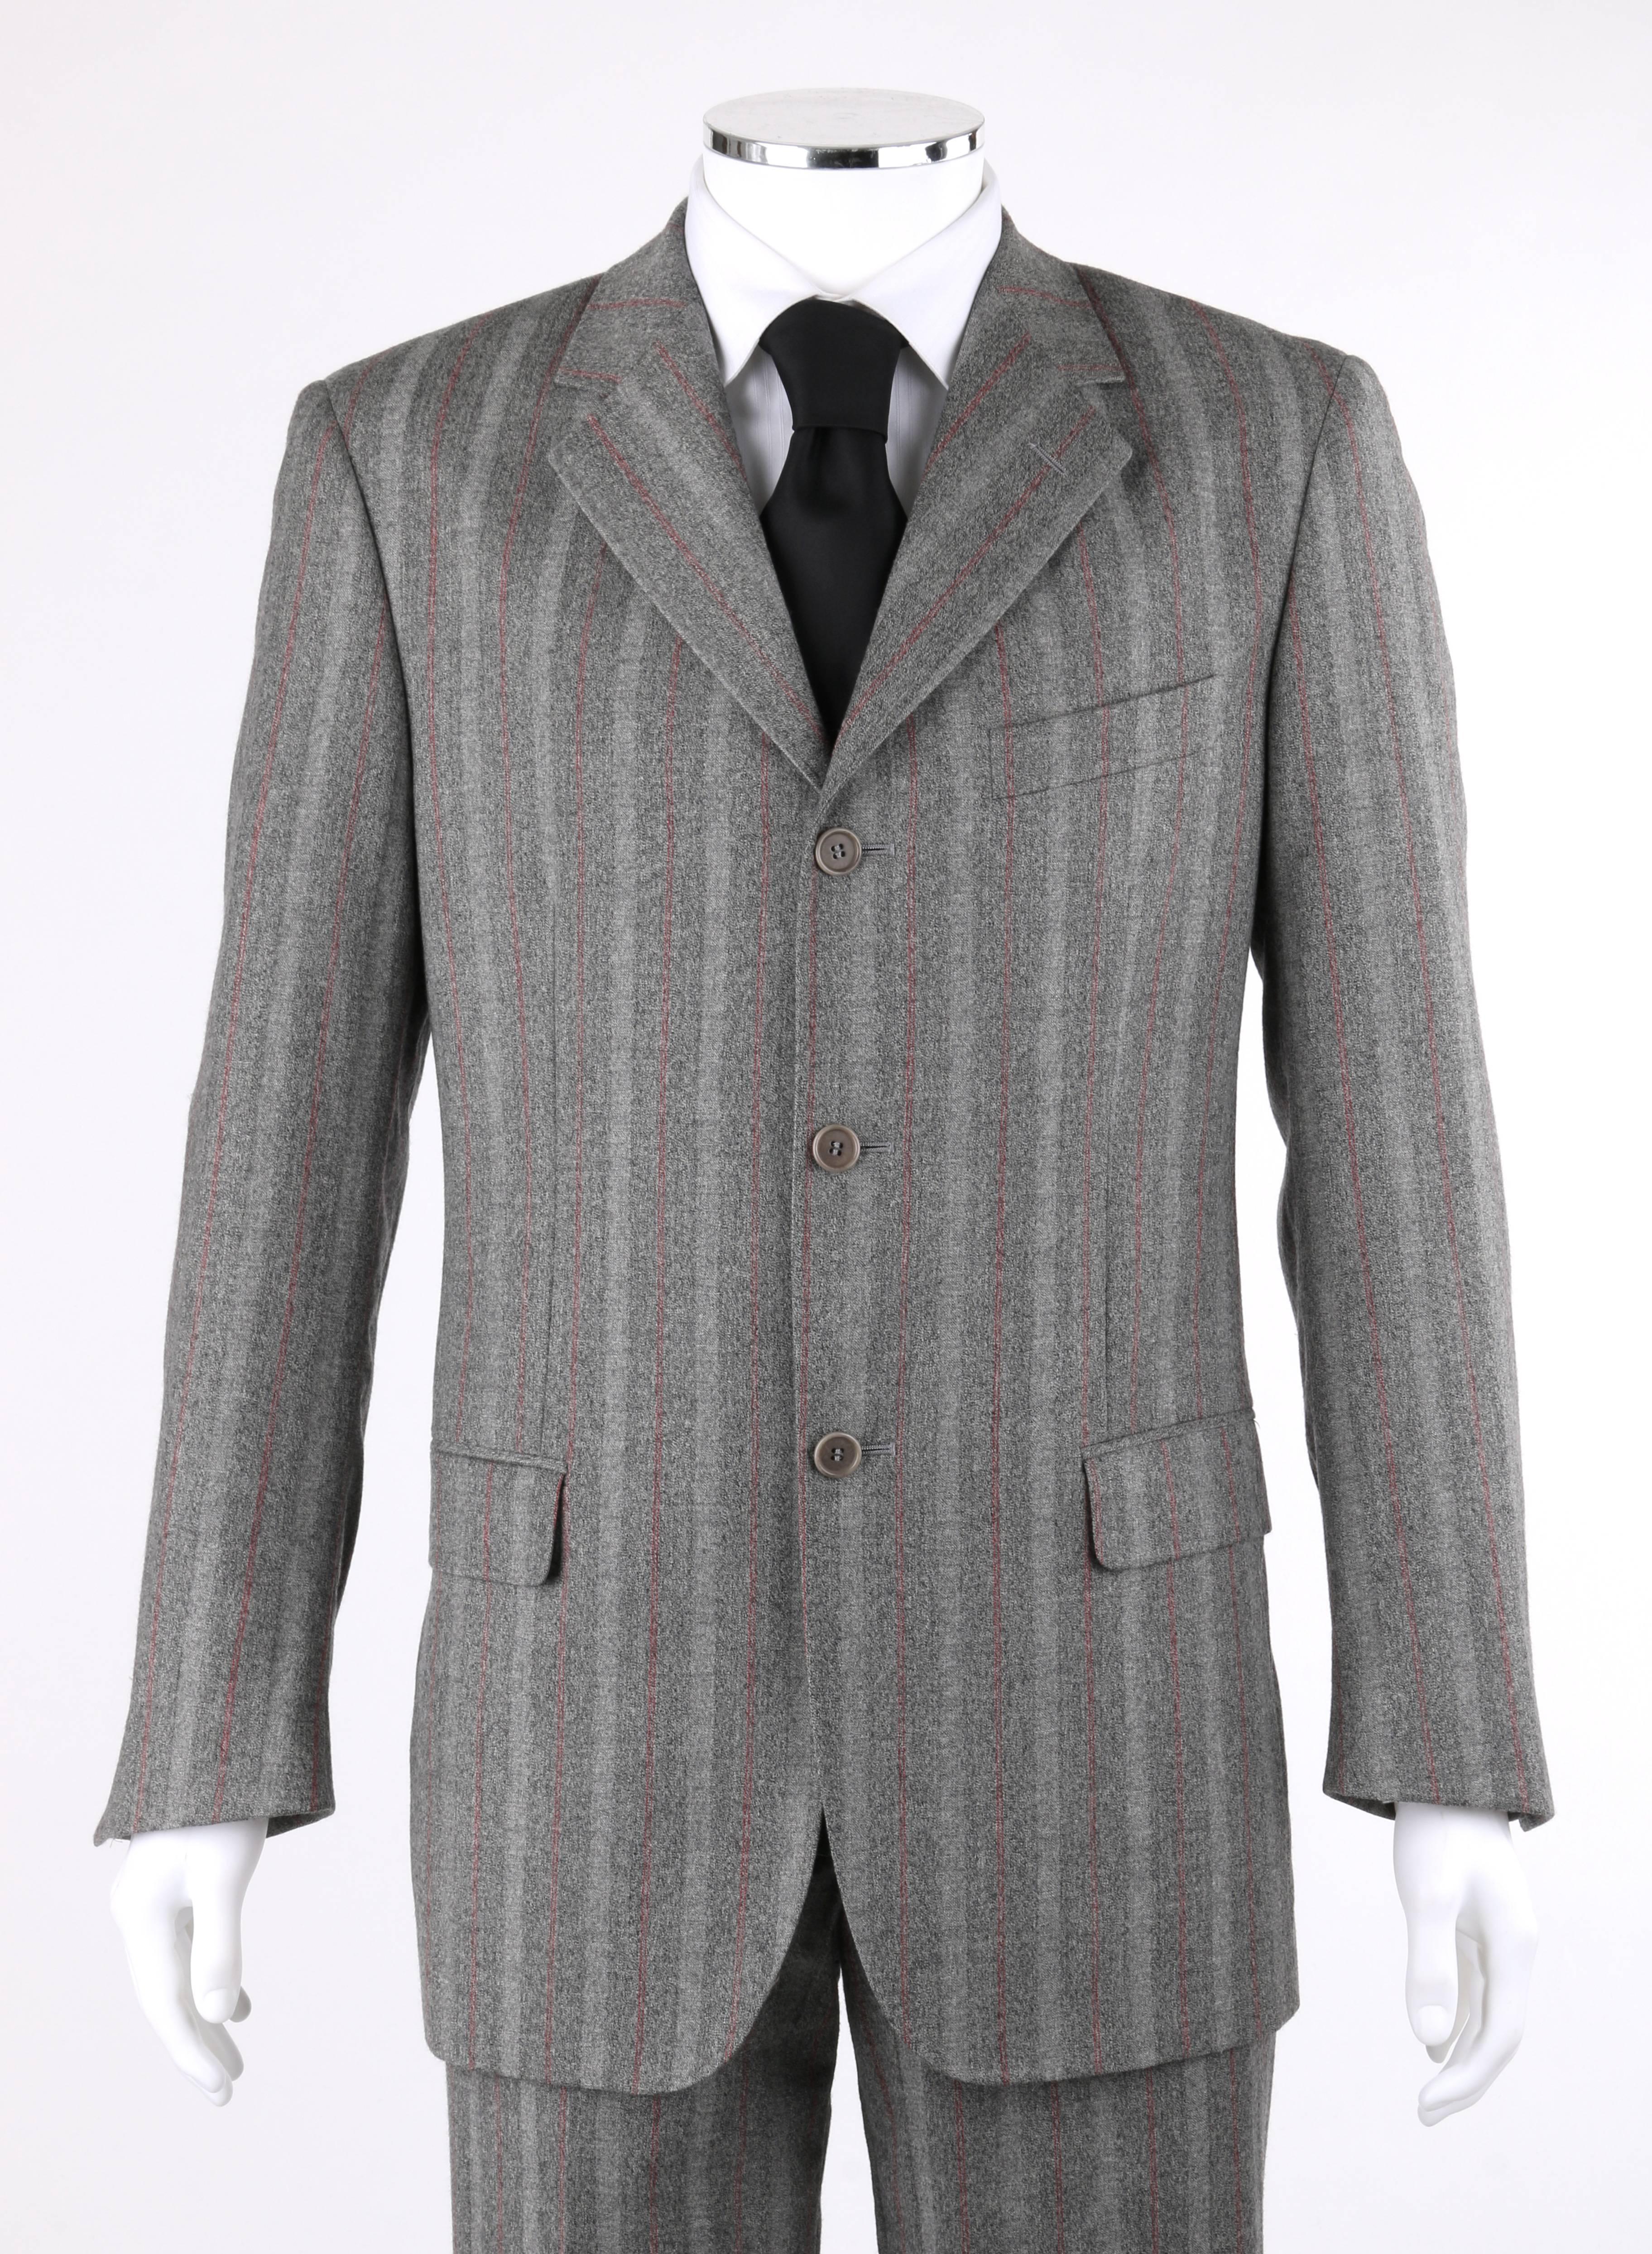 Alexander McQueen c.2001 two-piece gray and red pinstripe pantsuit. Double row red pinstripe on gray super 150 wool. Notched lapel collar jacket with buttonhole detail on lapel. Three center front button closures. Long sleeves with four-button